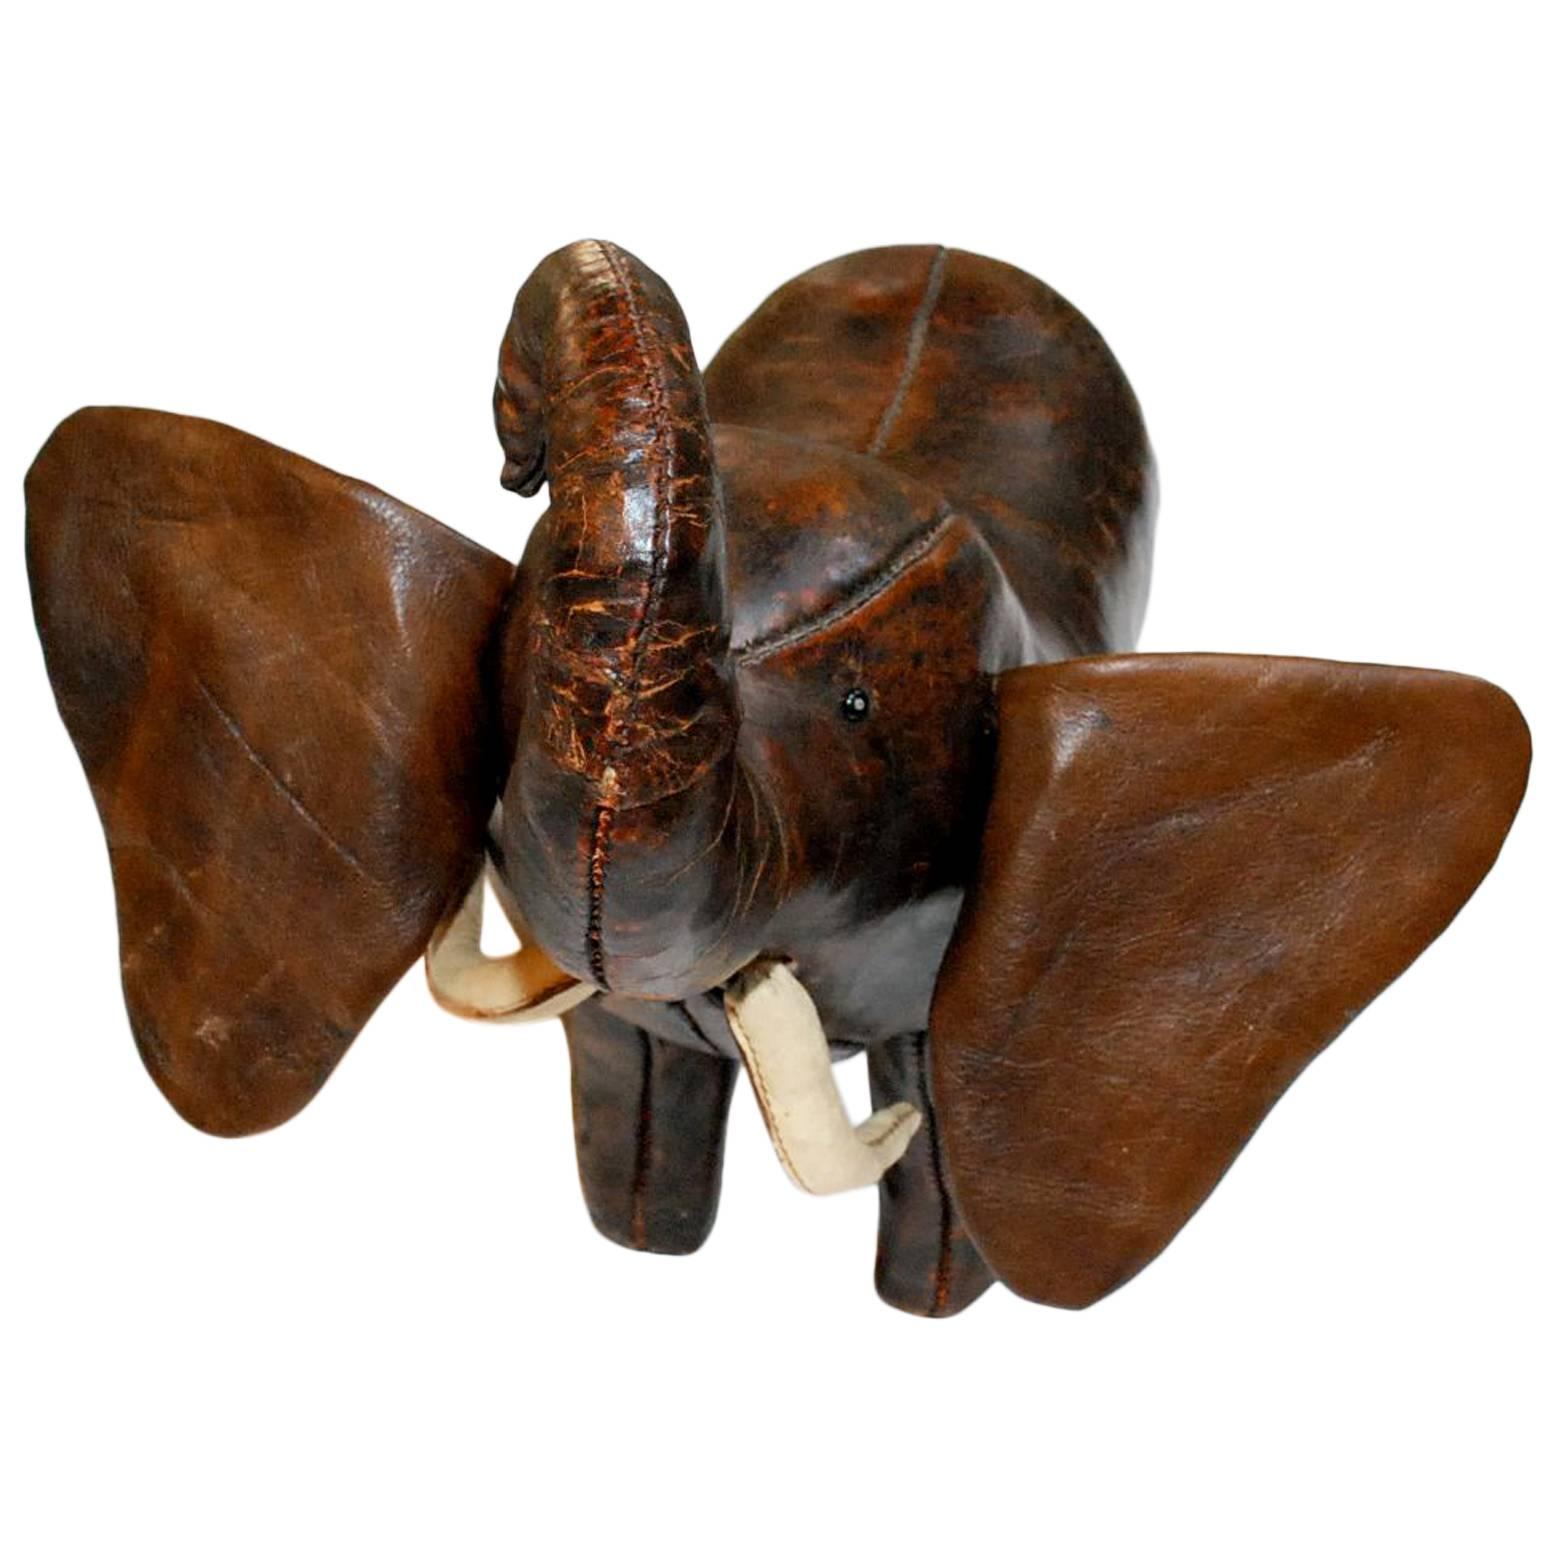 Vintage Leather Elephant by Dimitri Omersa for Abercrombie & Fitch